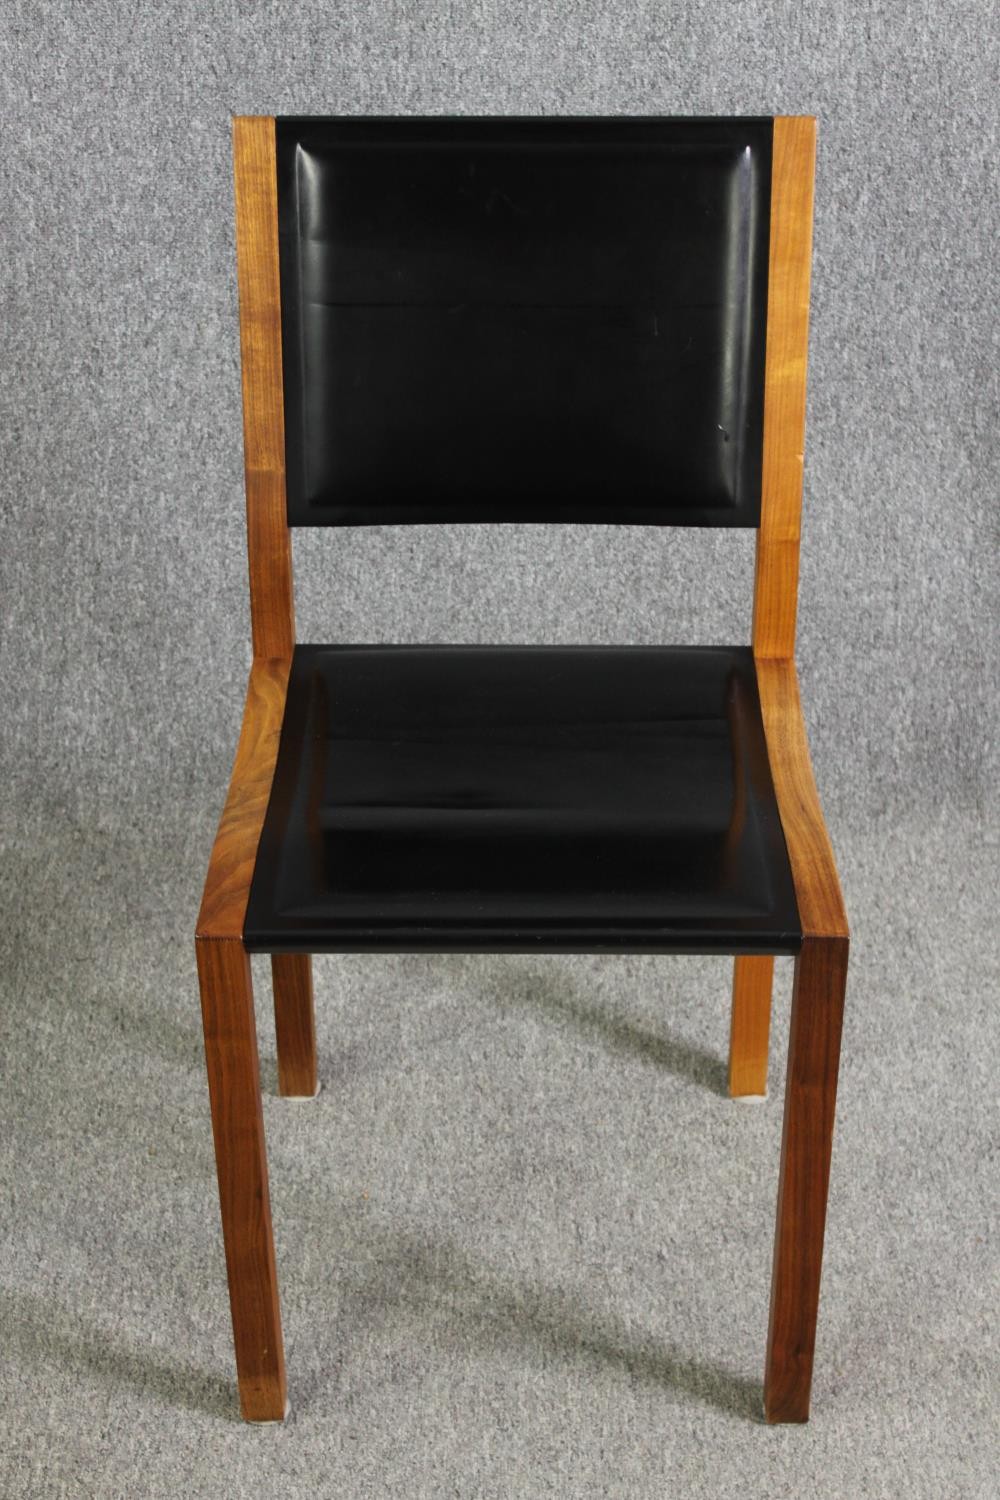 A pair contemporary Heal's teak and black leather dining chairs - Image 2 of 6